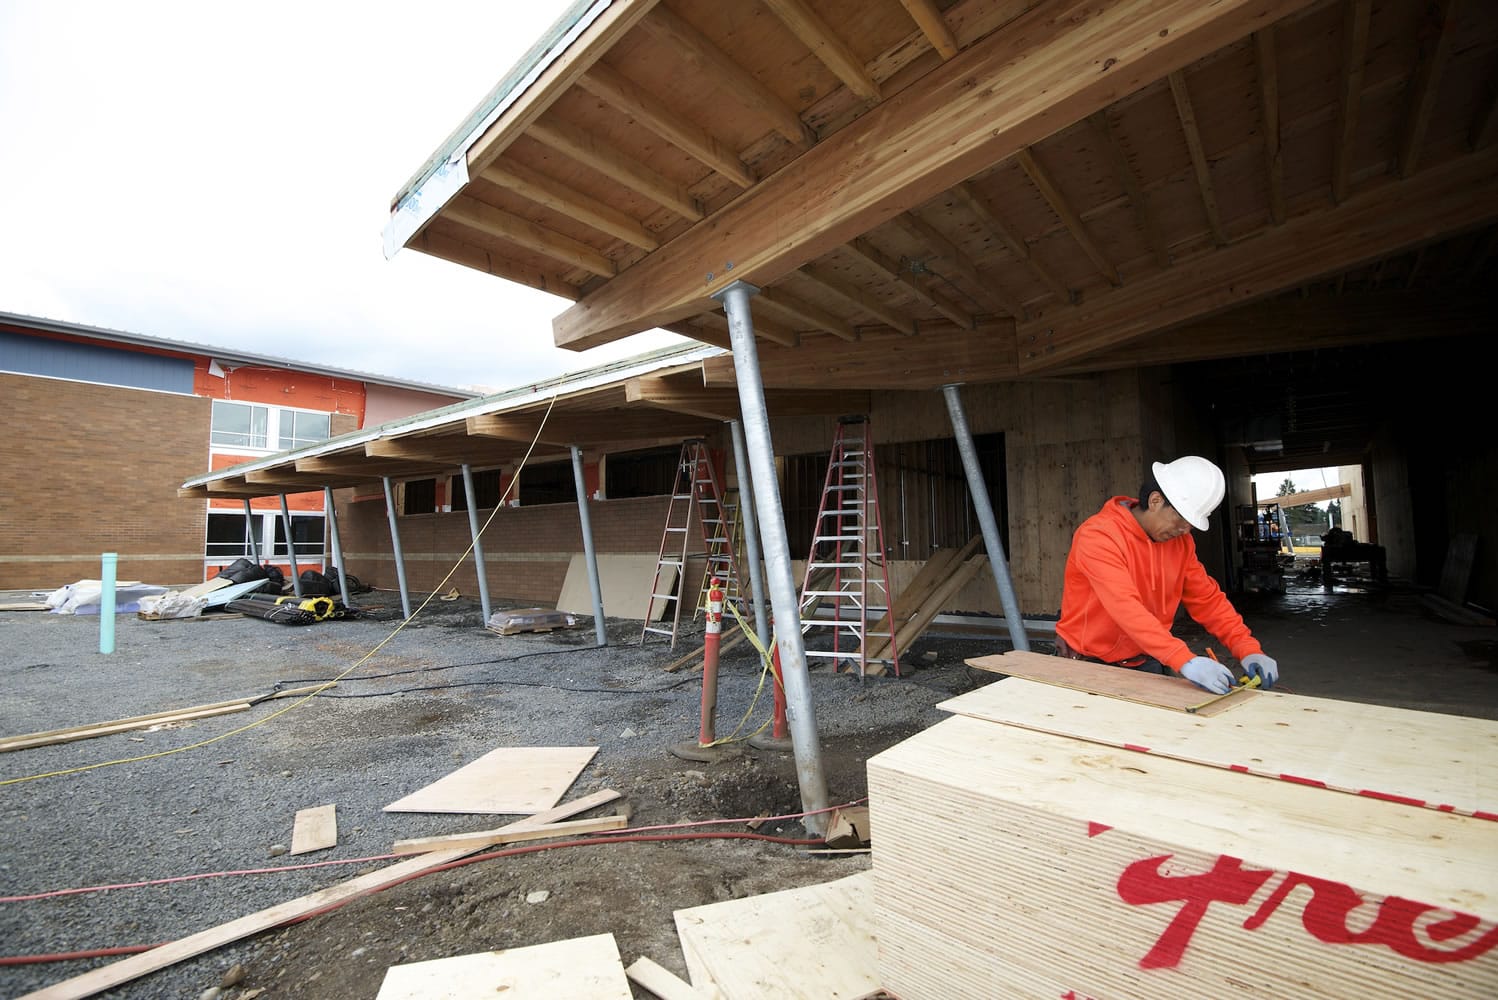 Ocotlan Neria Corona, with Carpentry Plus, works on framing at Crestline Elementary on Monday in Vancouver.